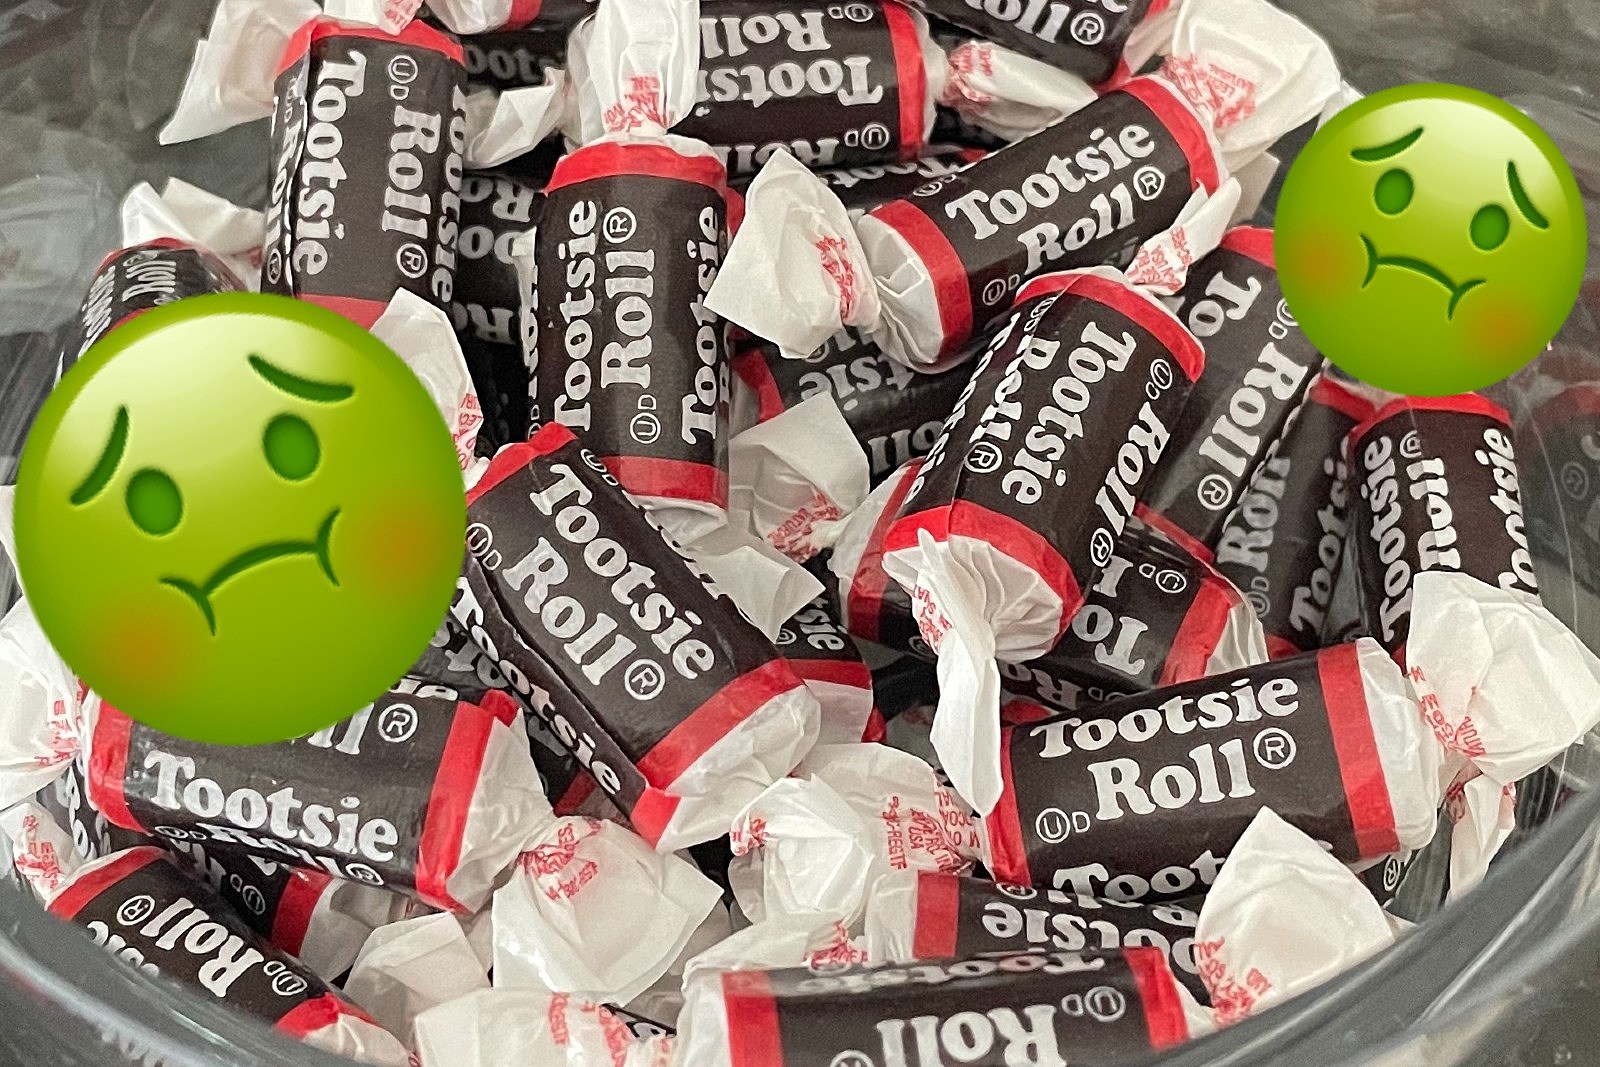 Tootsie Rolls are the NJ toxic dump of Halloween candy